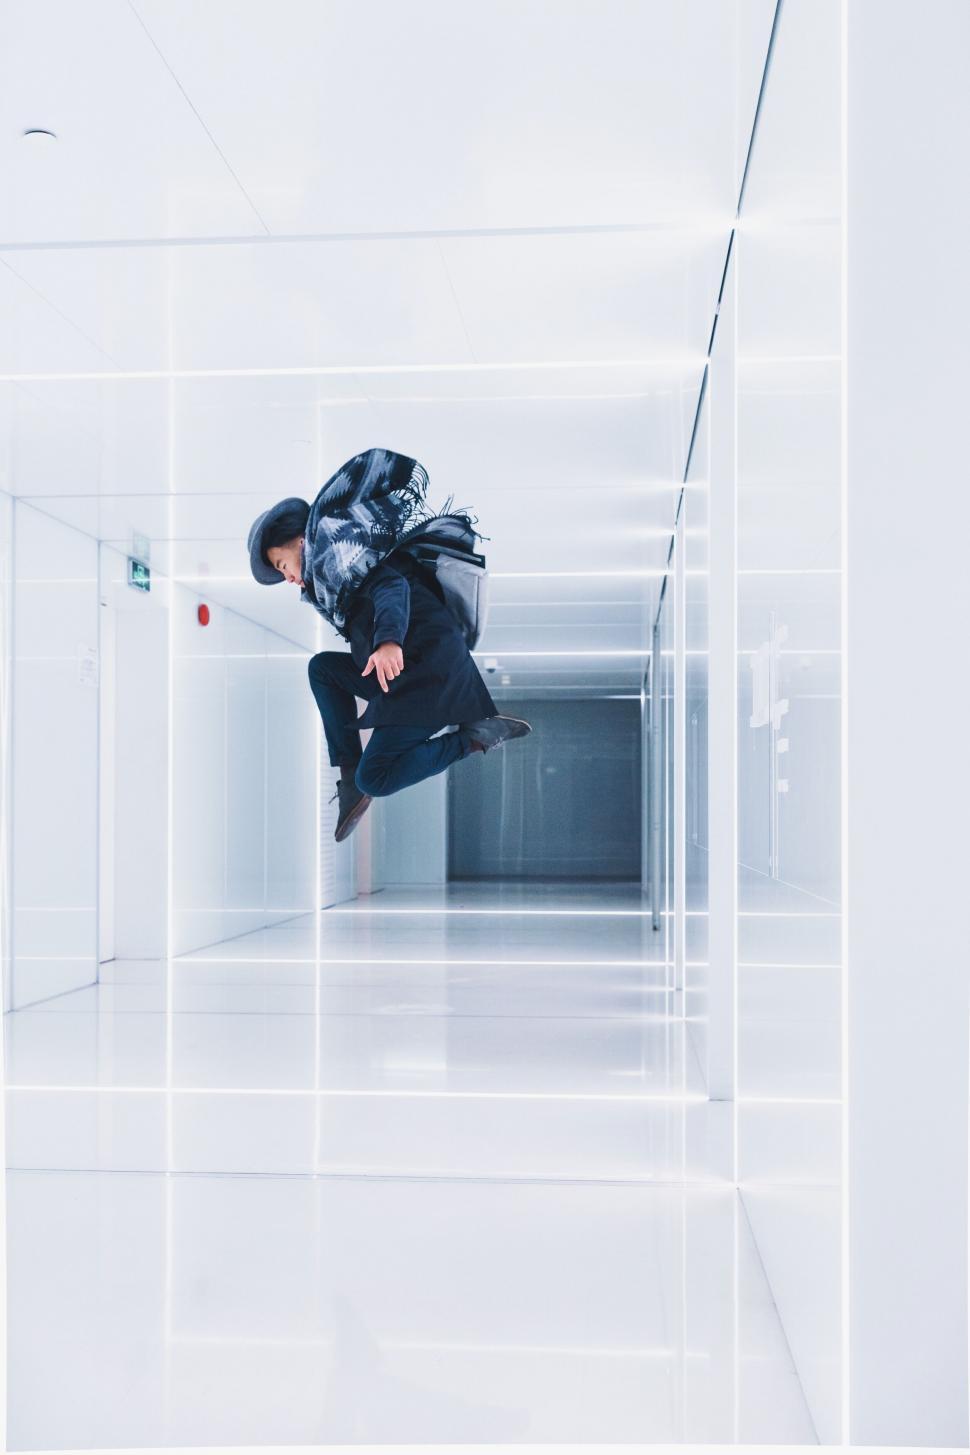 Free Image of A man jumping in a hallway 